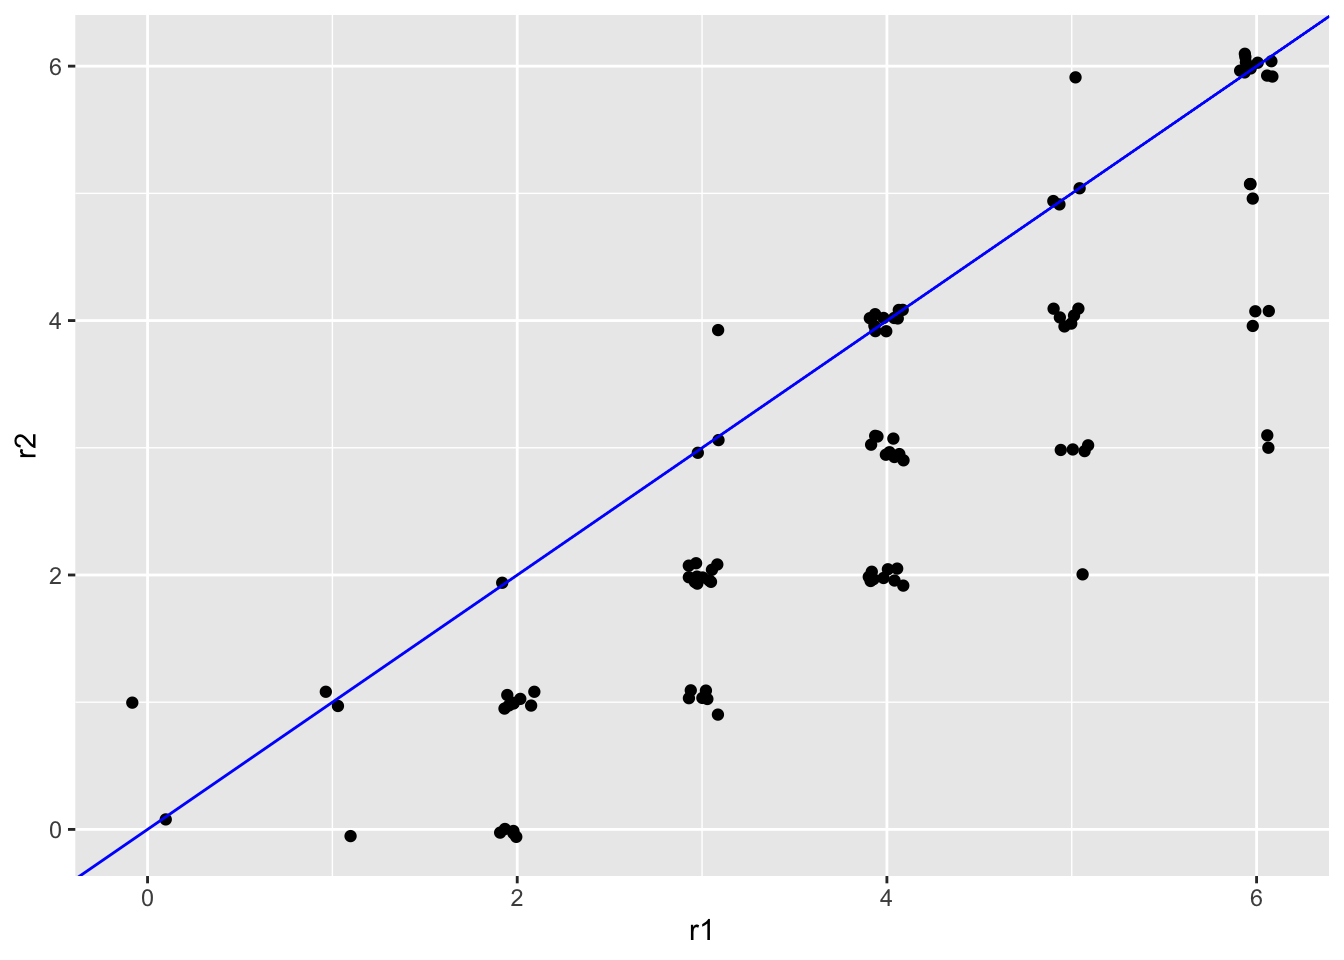 Scatter plots of simulated essay scores with a systematic difference around 0.5 points.